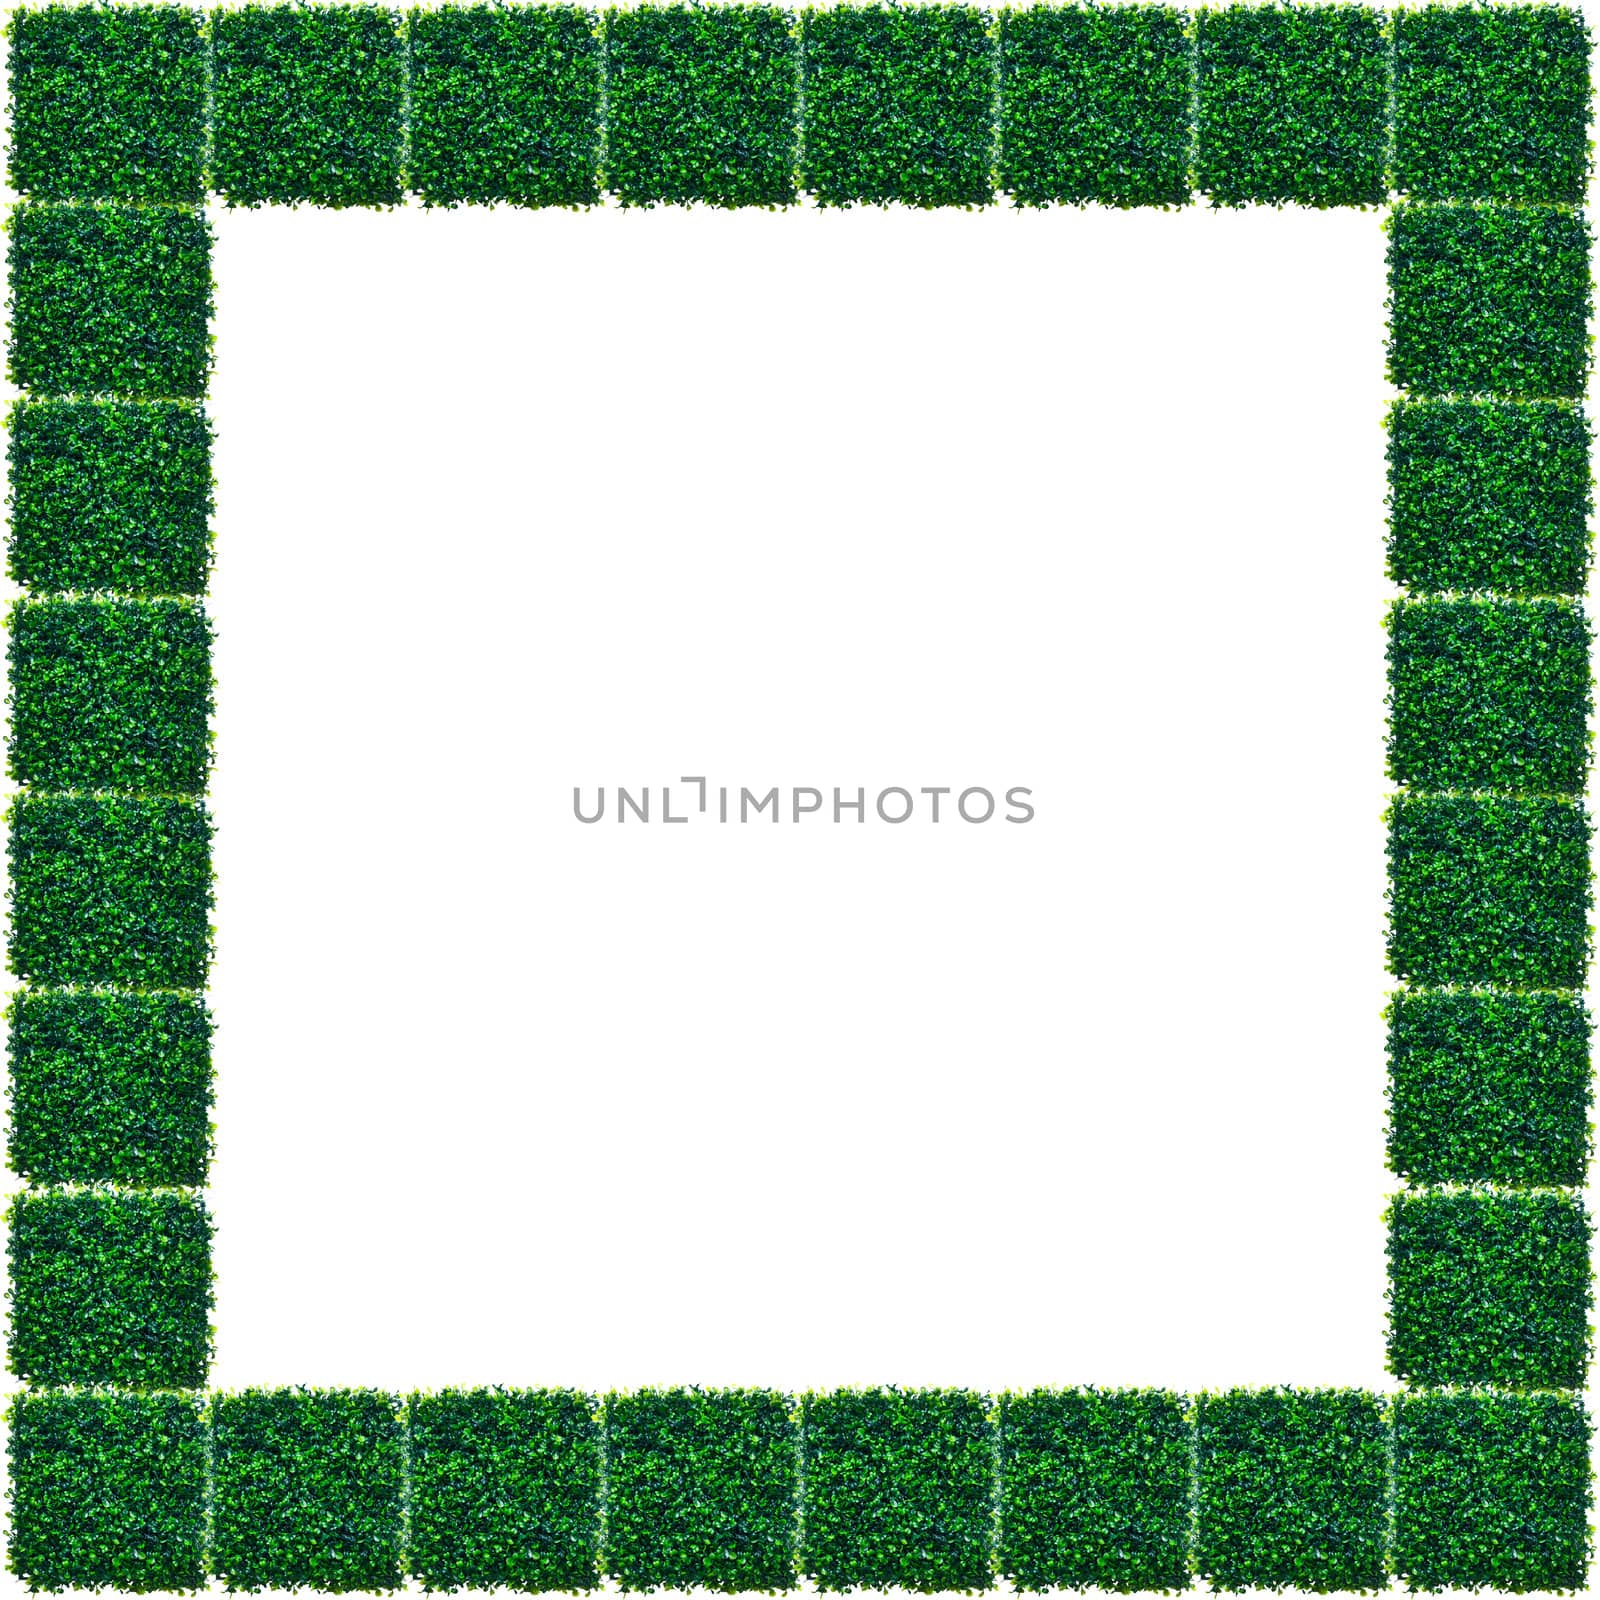 Isolated Artificial Grass Photo Frame.